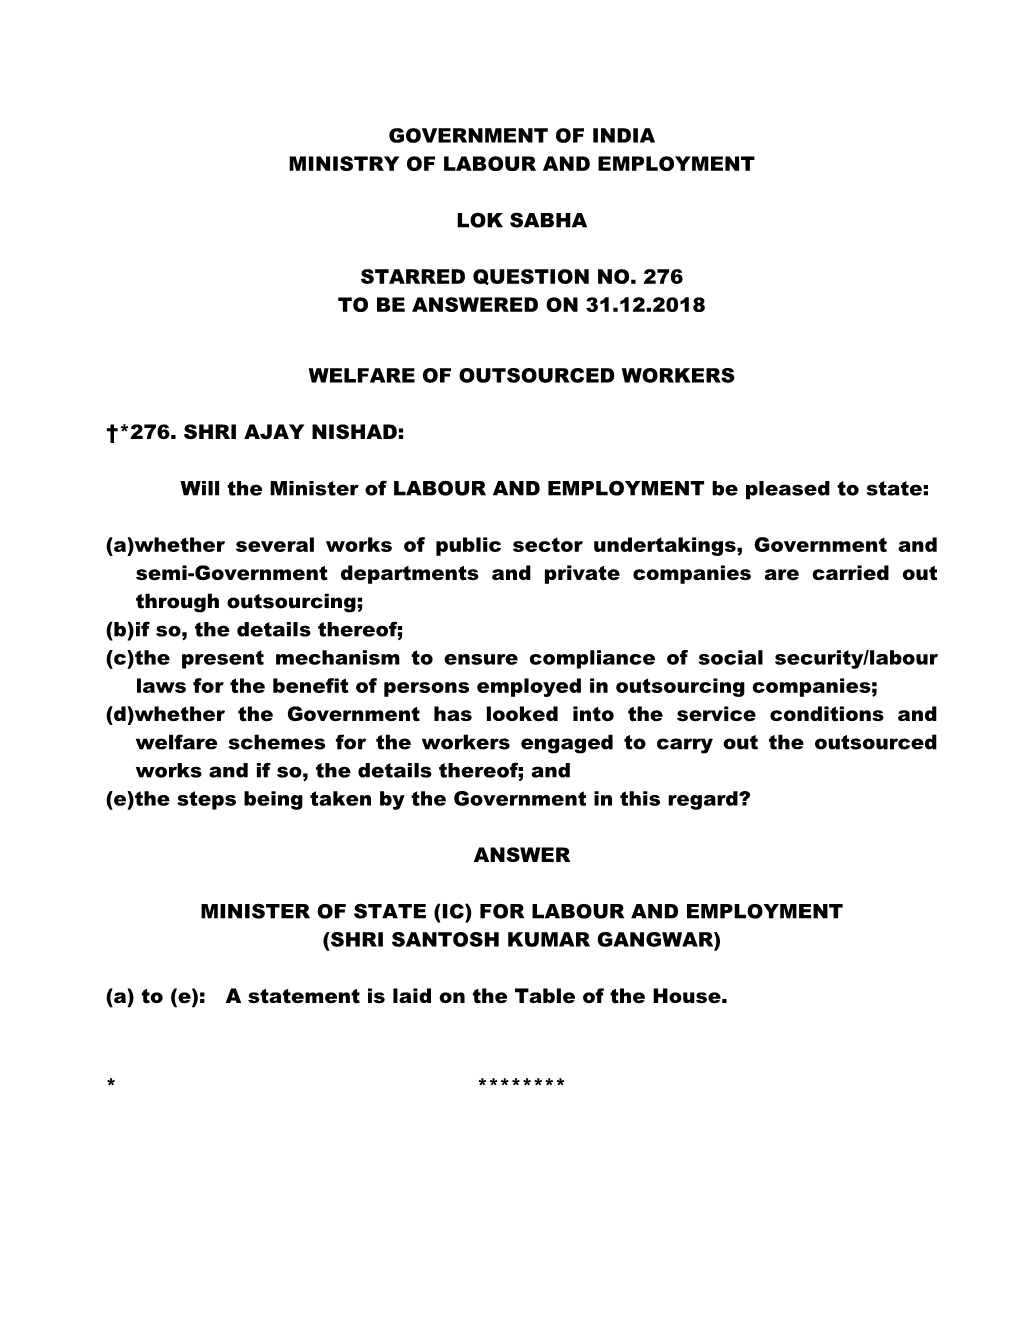 Government of India Ministry of Labour and Employment Lok Sabha Starred Question No. 276 to Be Answered on 31.12.2018 Welfare Of